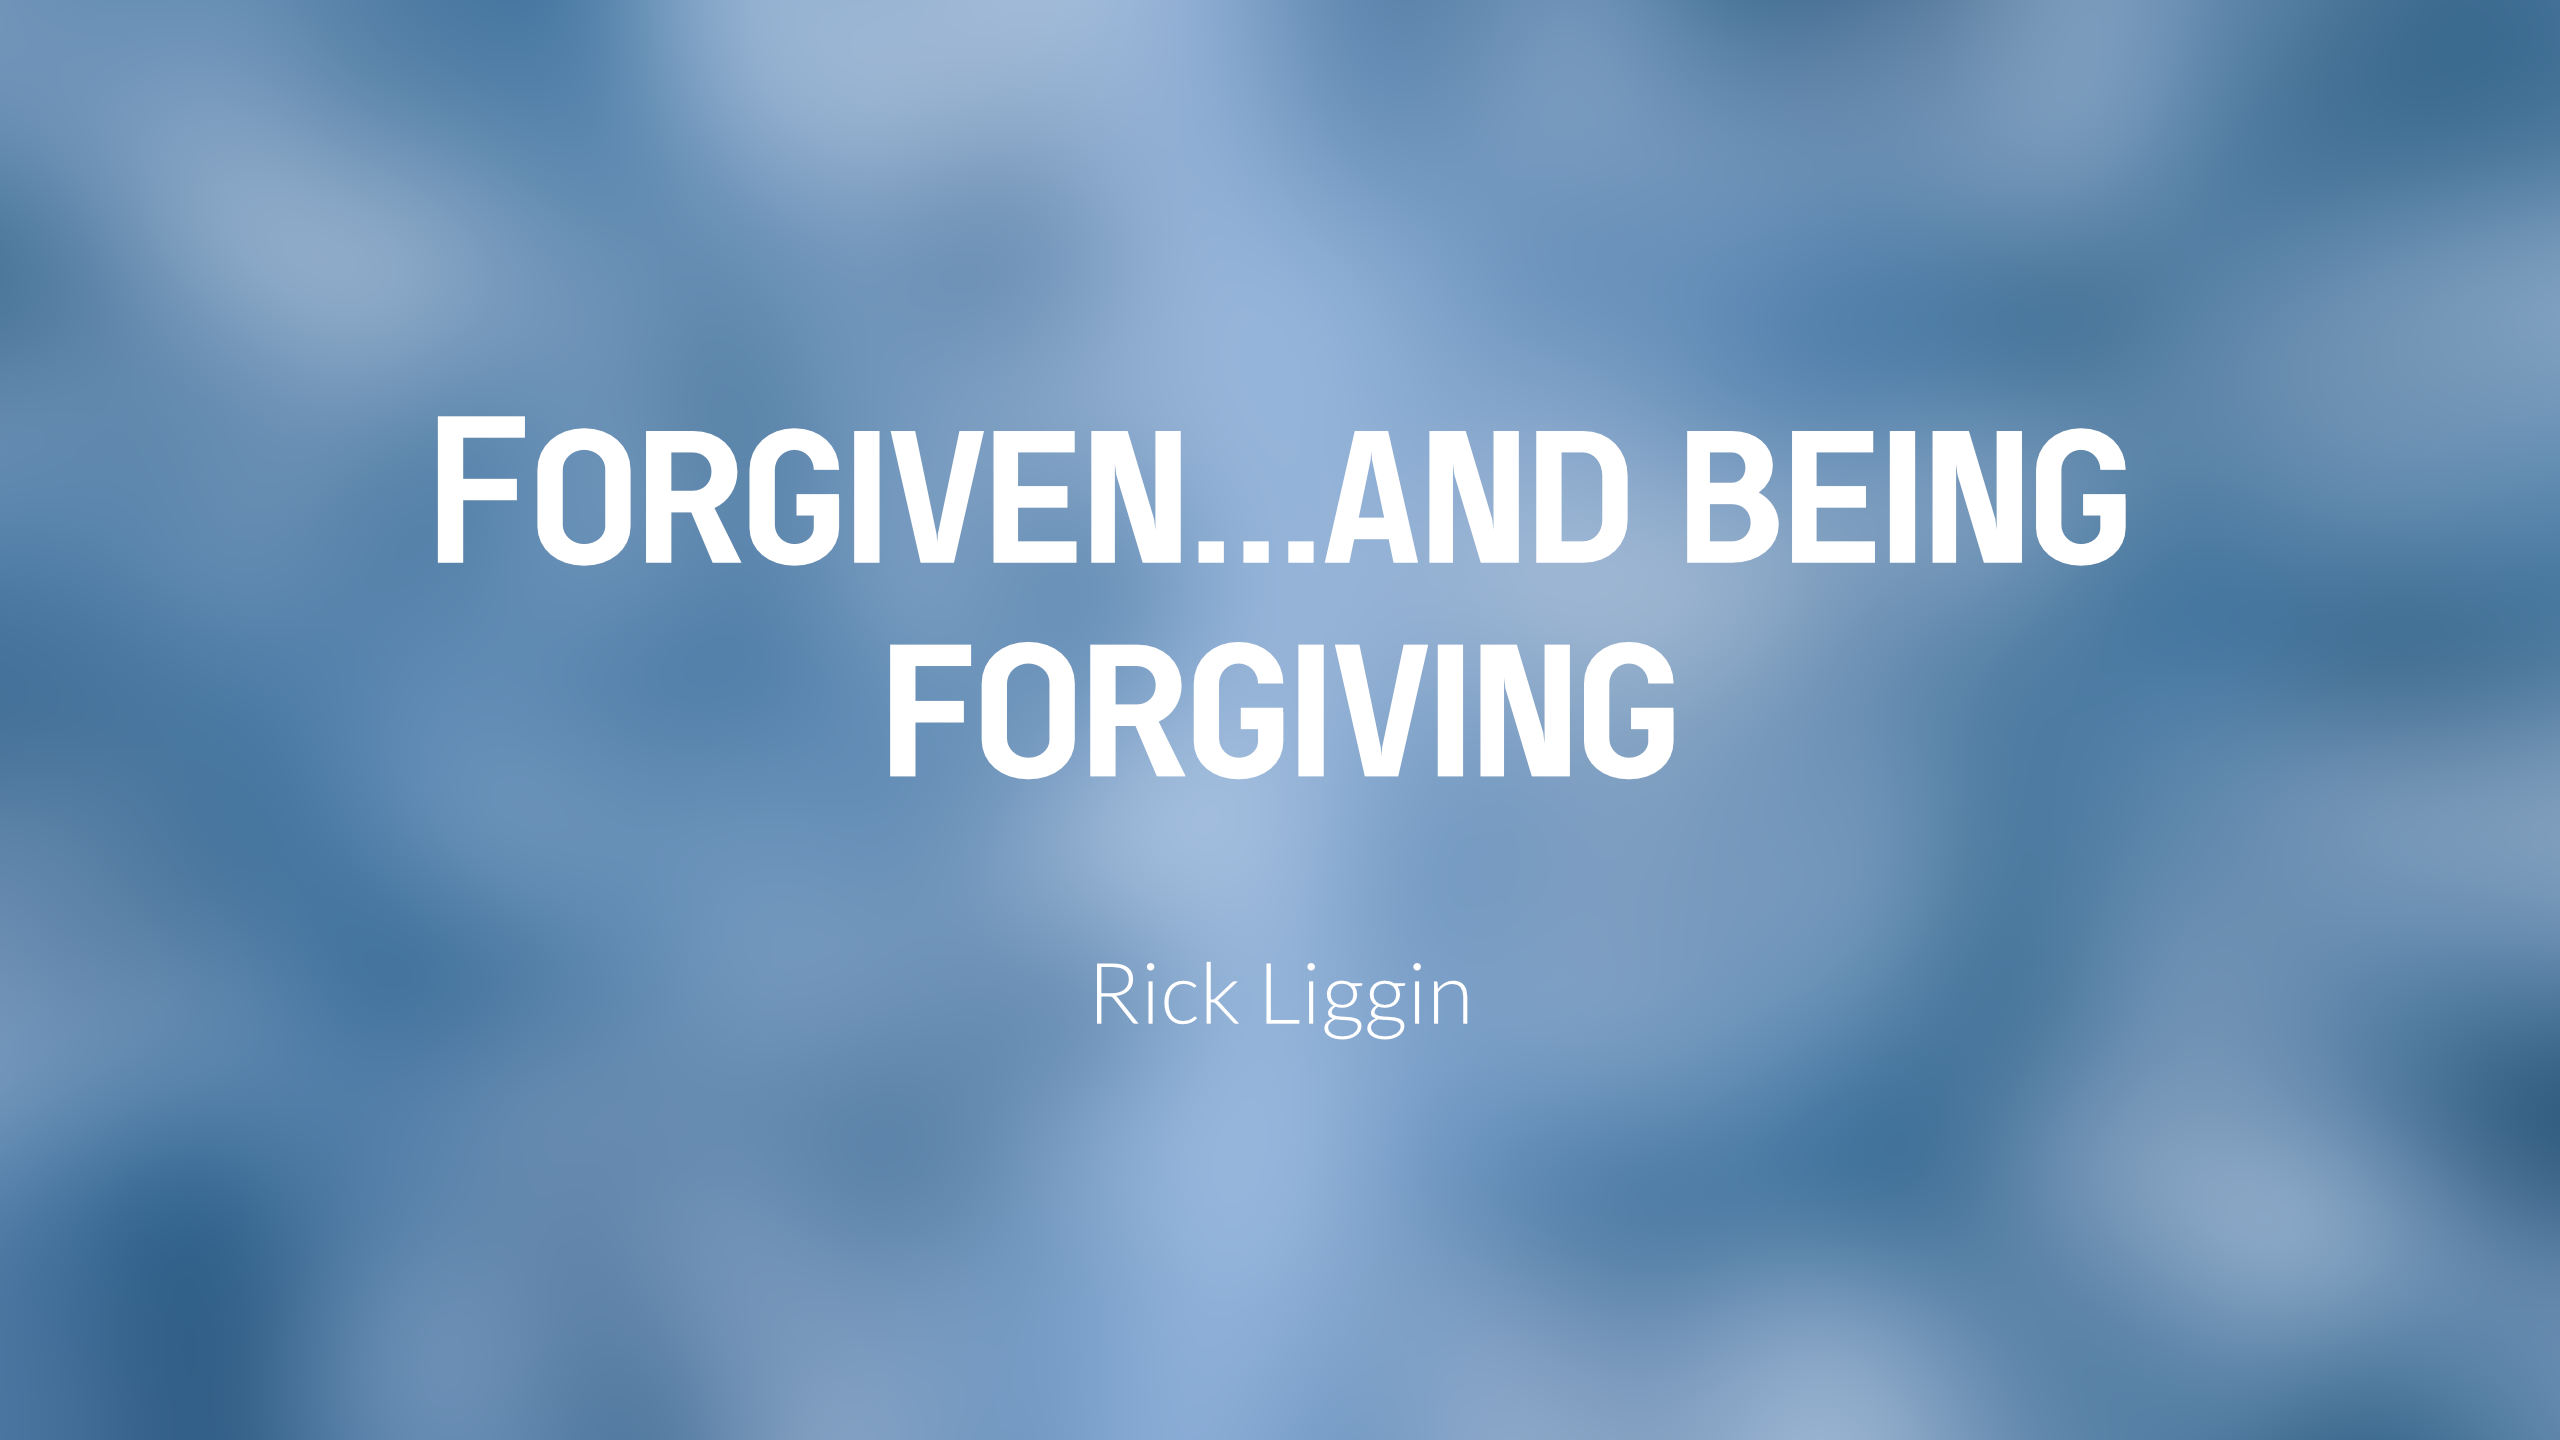 Forgiven...and being Forgiving